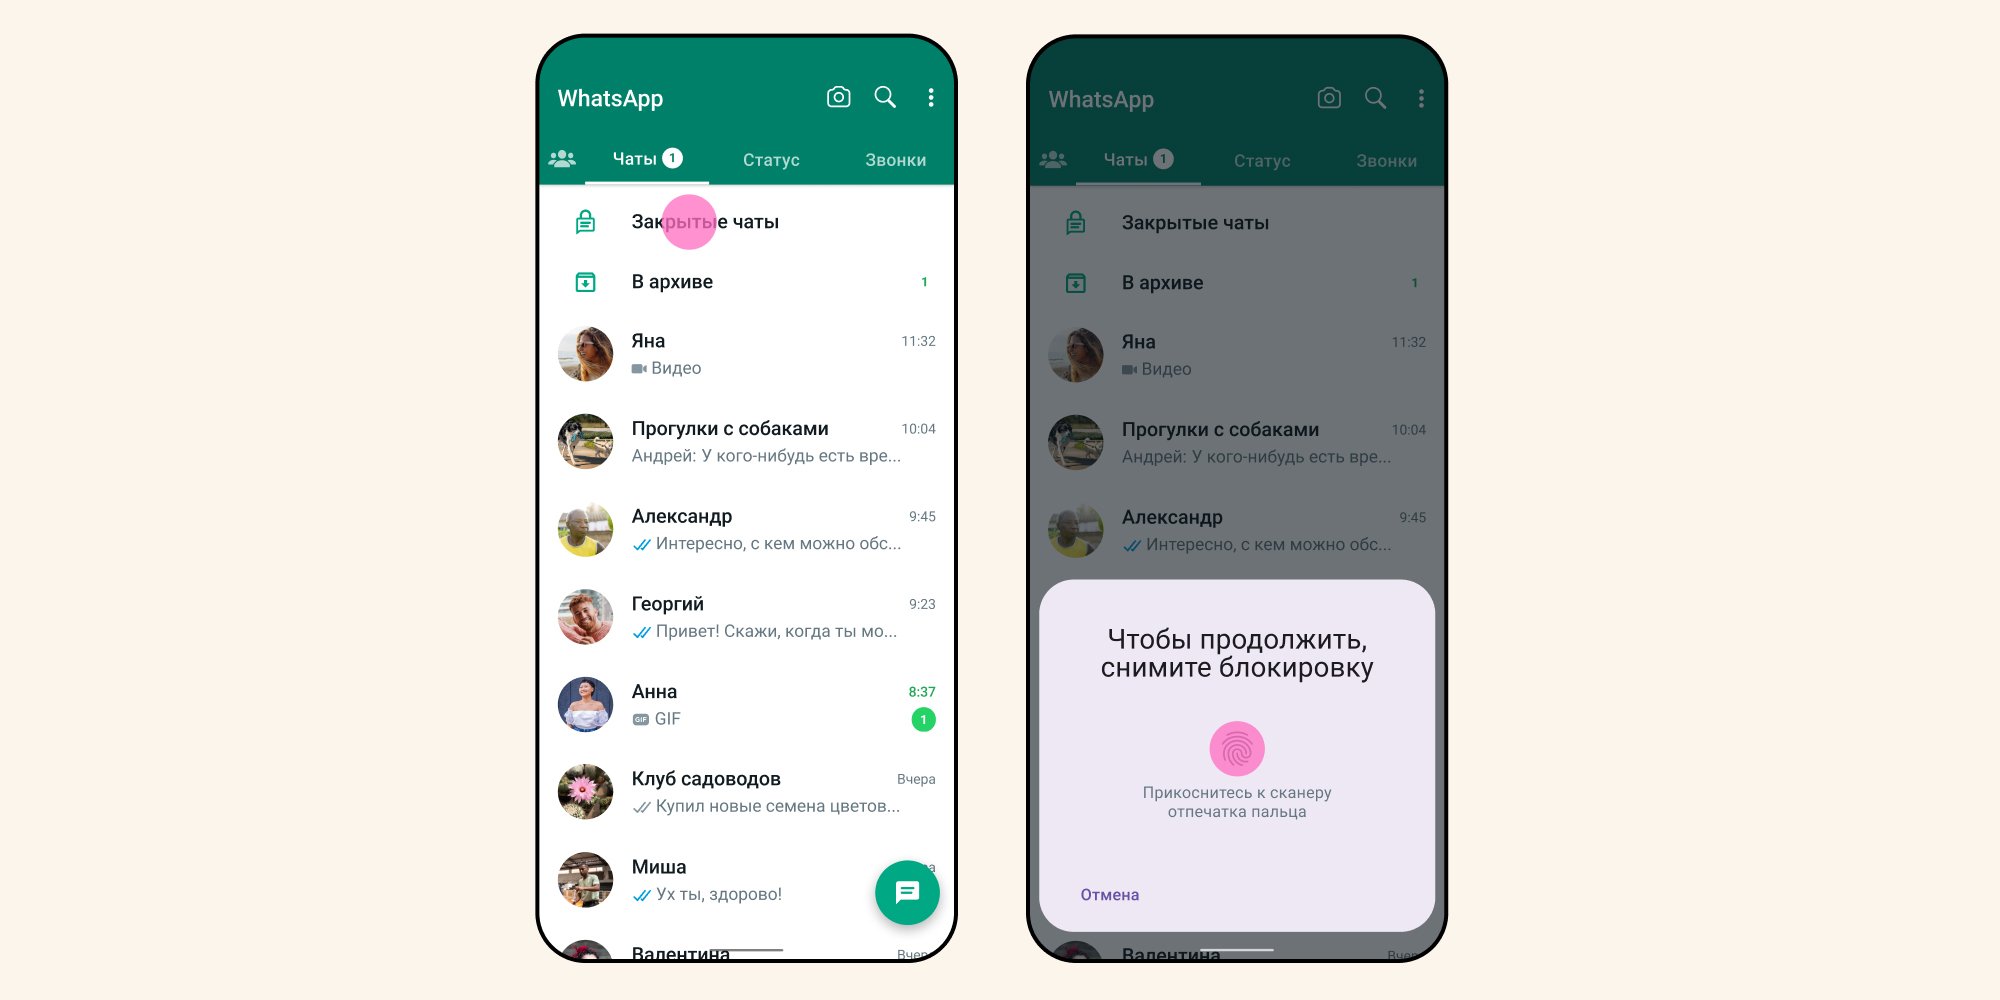 WhatsApp has closed chats — with a password and without notifications